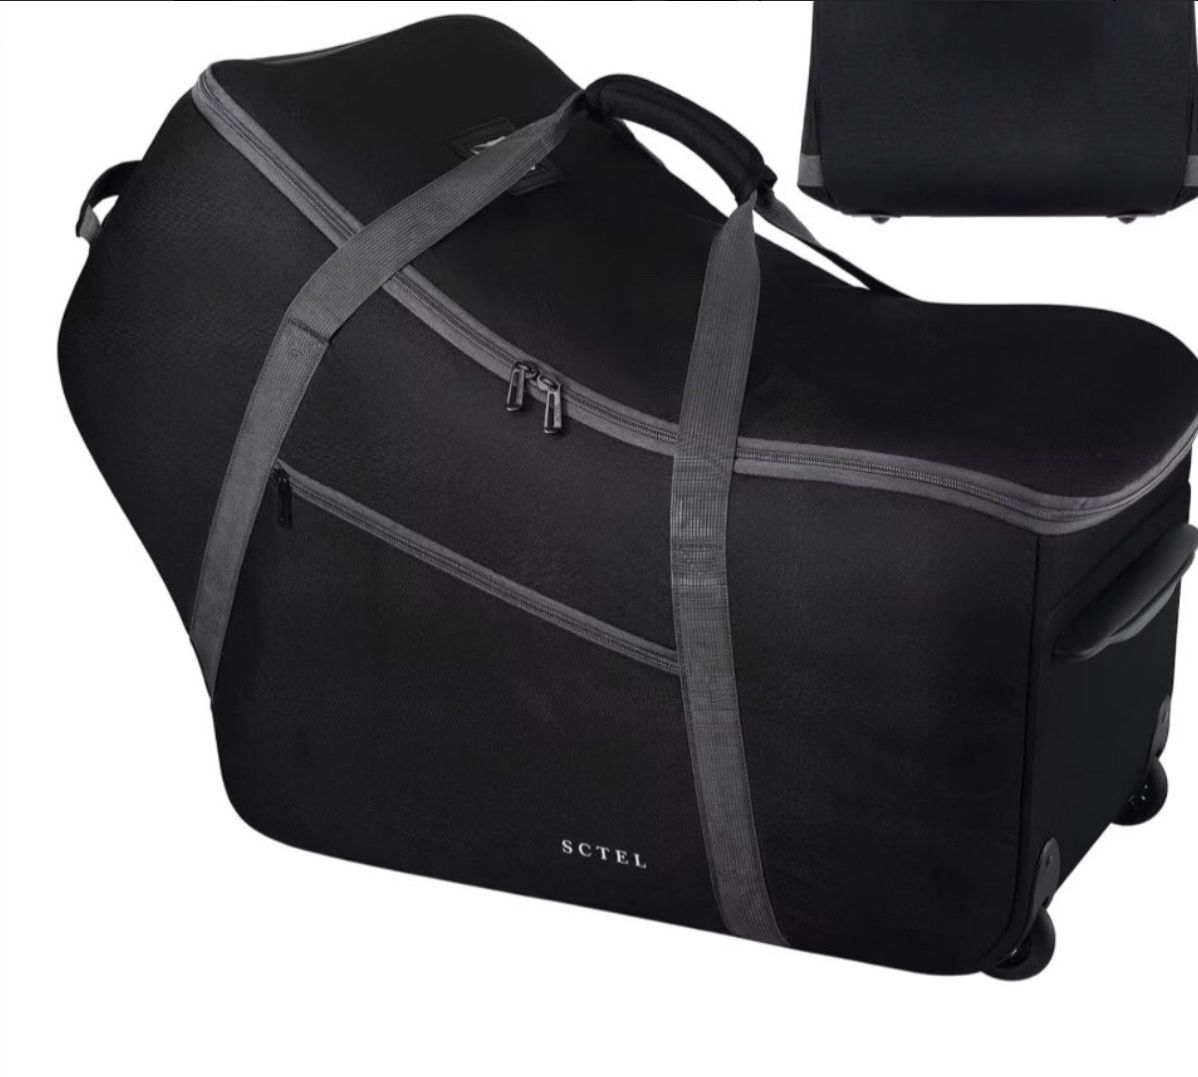 SCTEL Car Seat Travel Bag for Airplane Fits